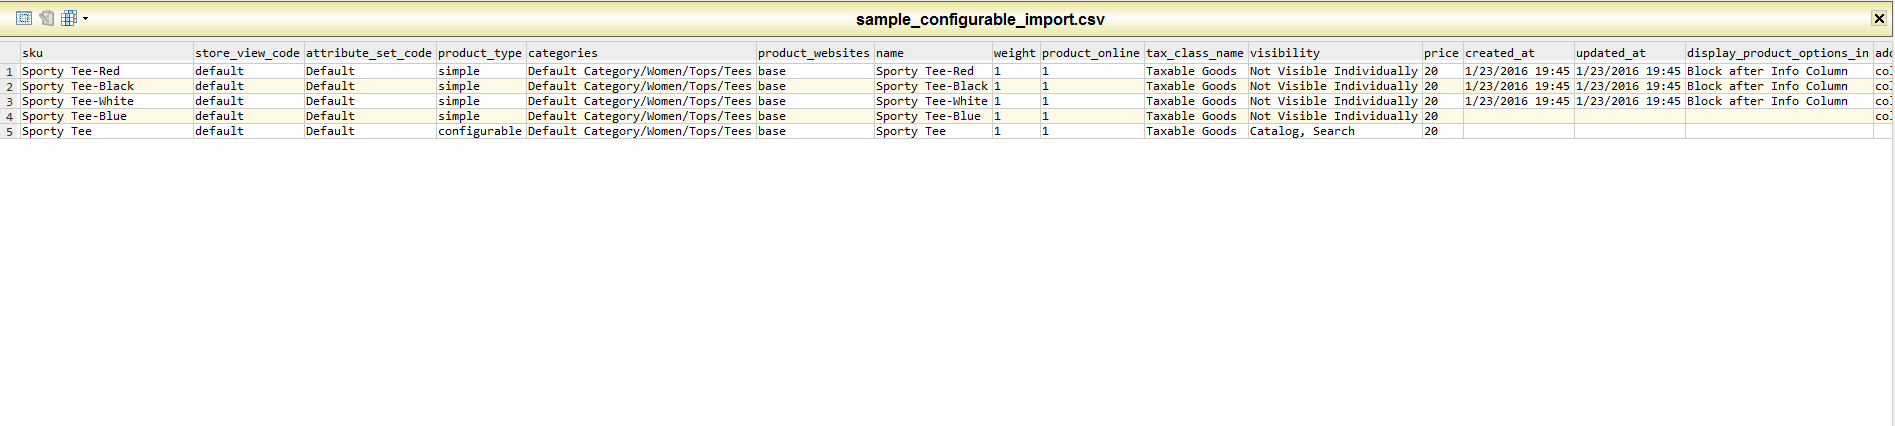 CSV file for magento 2 import configurable product